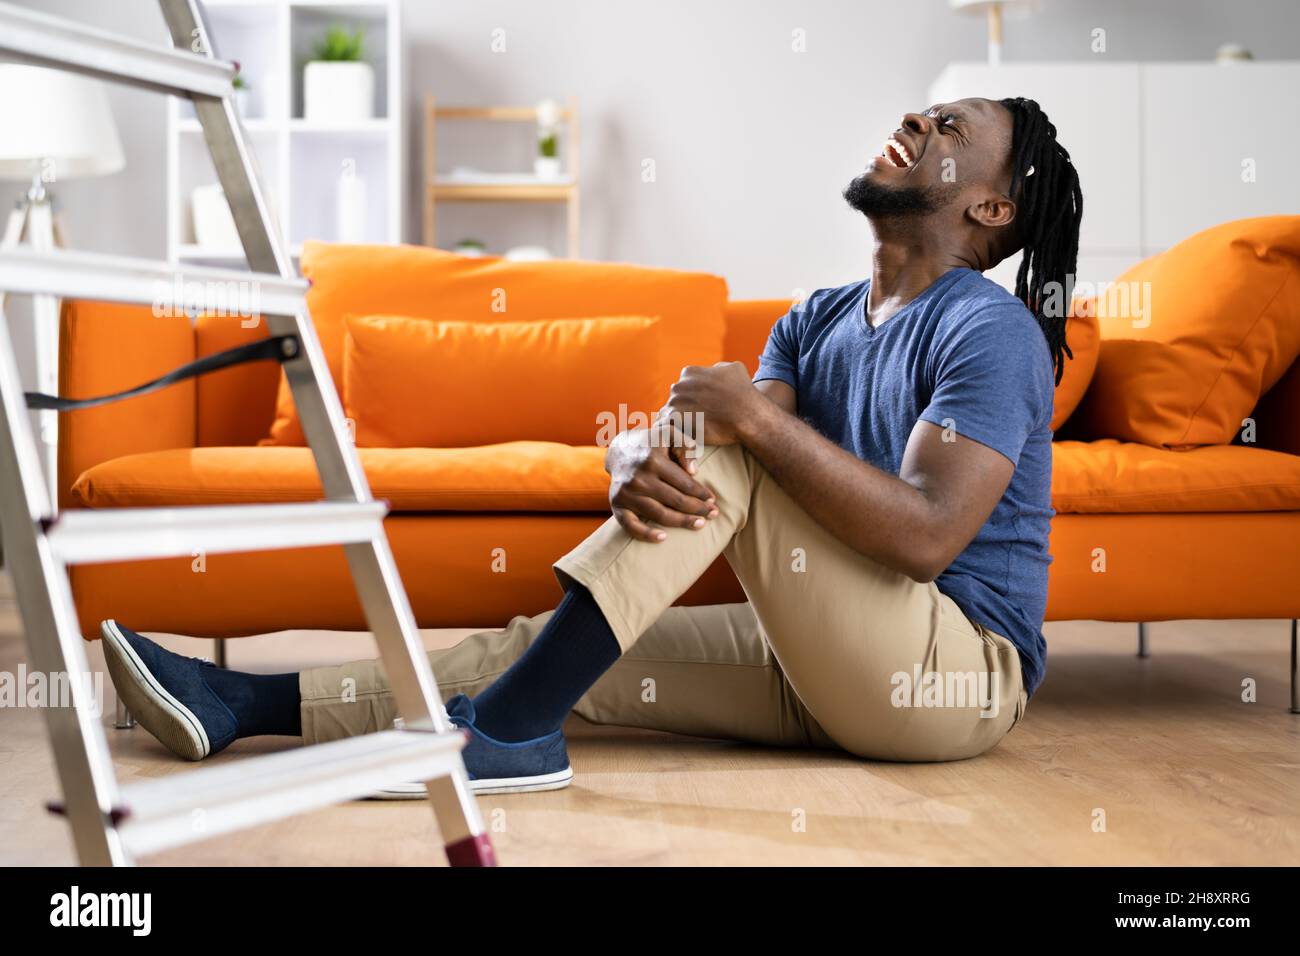 Man Falling From Ladder Accident. Safety And Injury Stock Photo